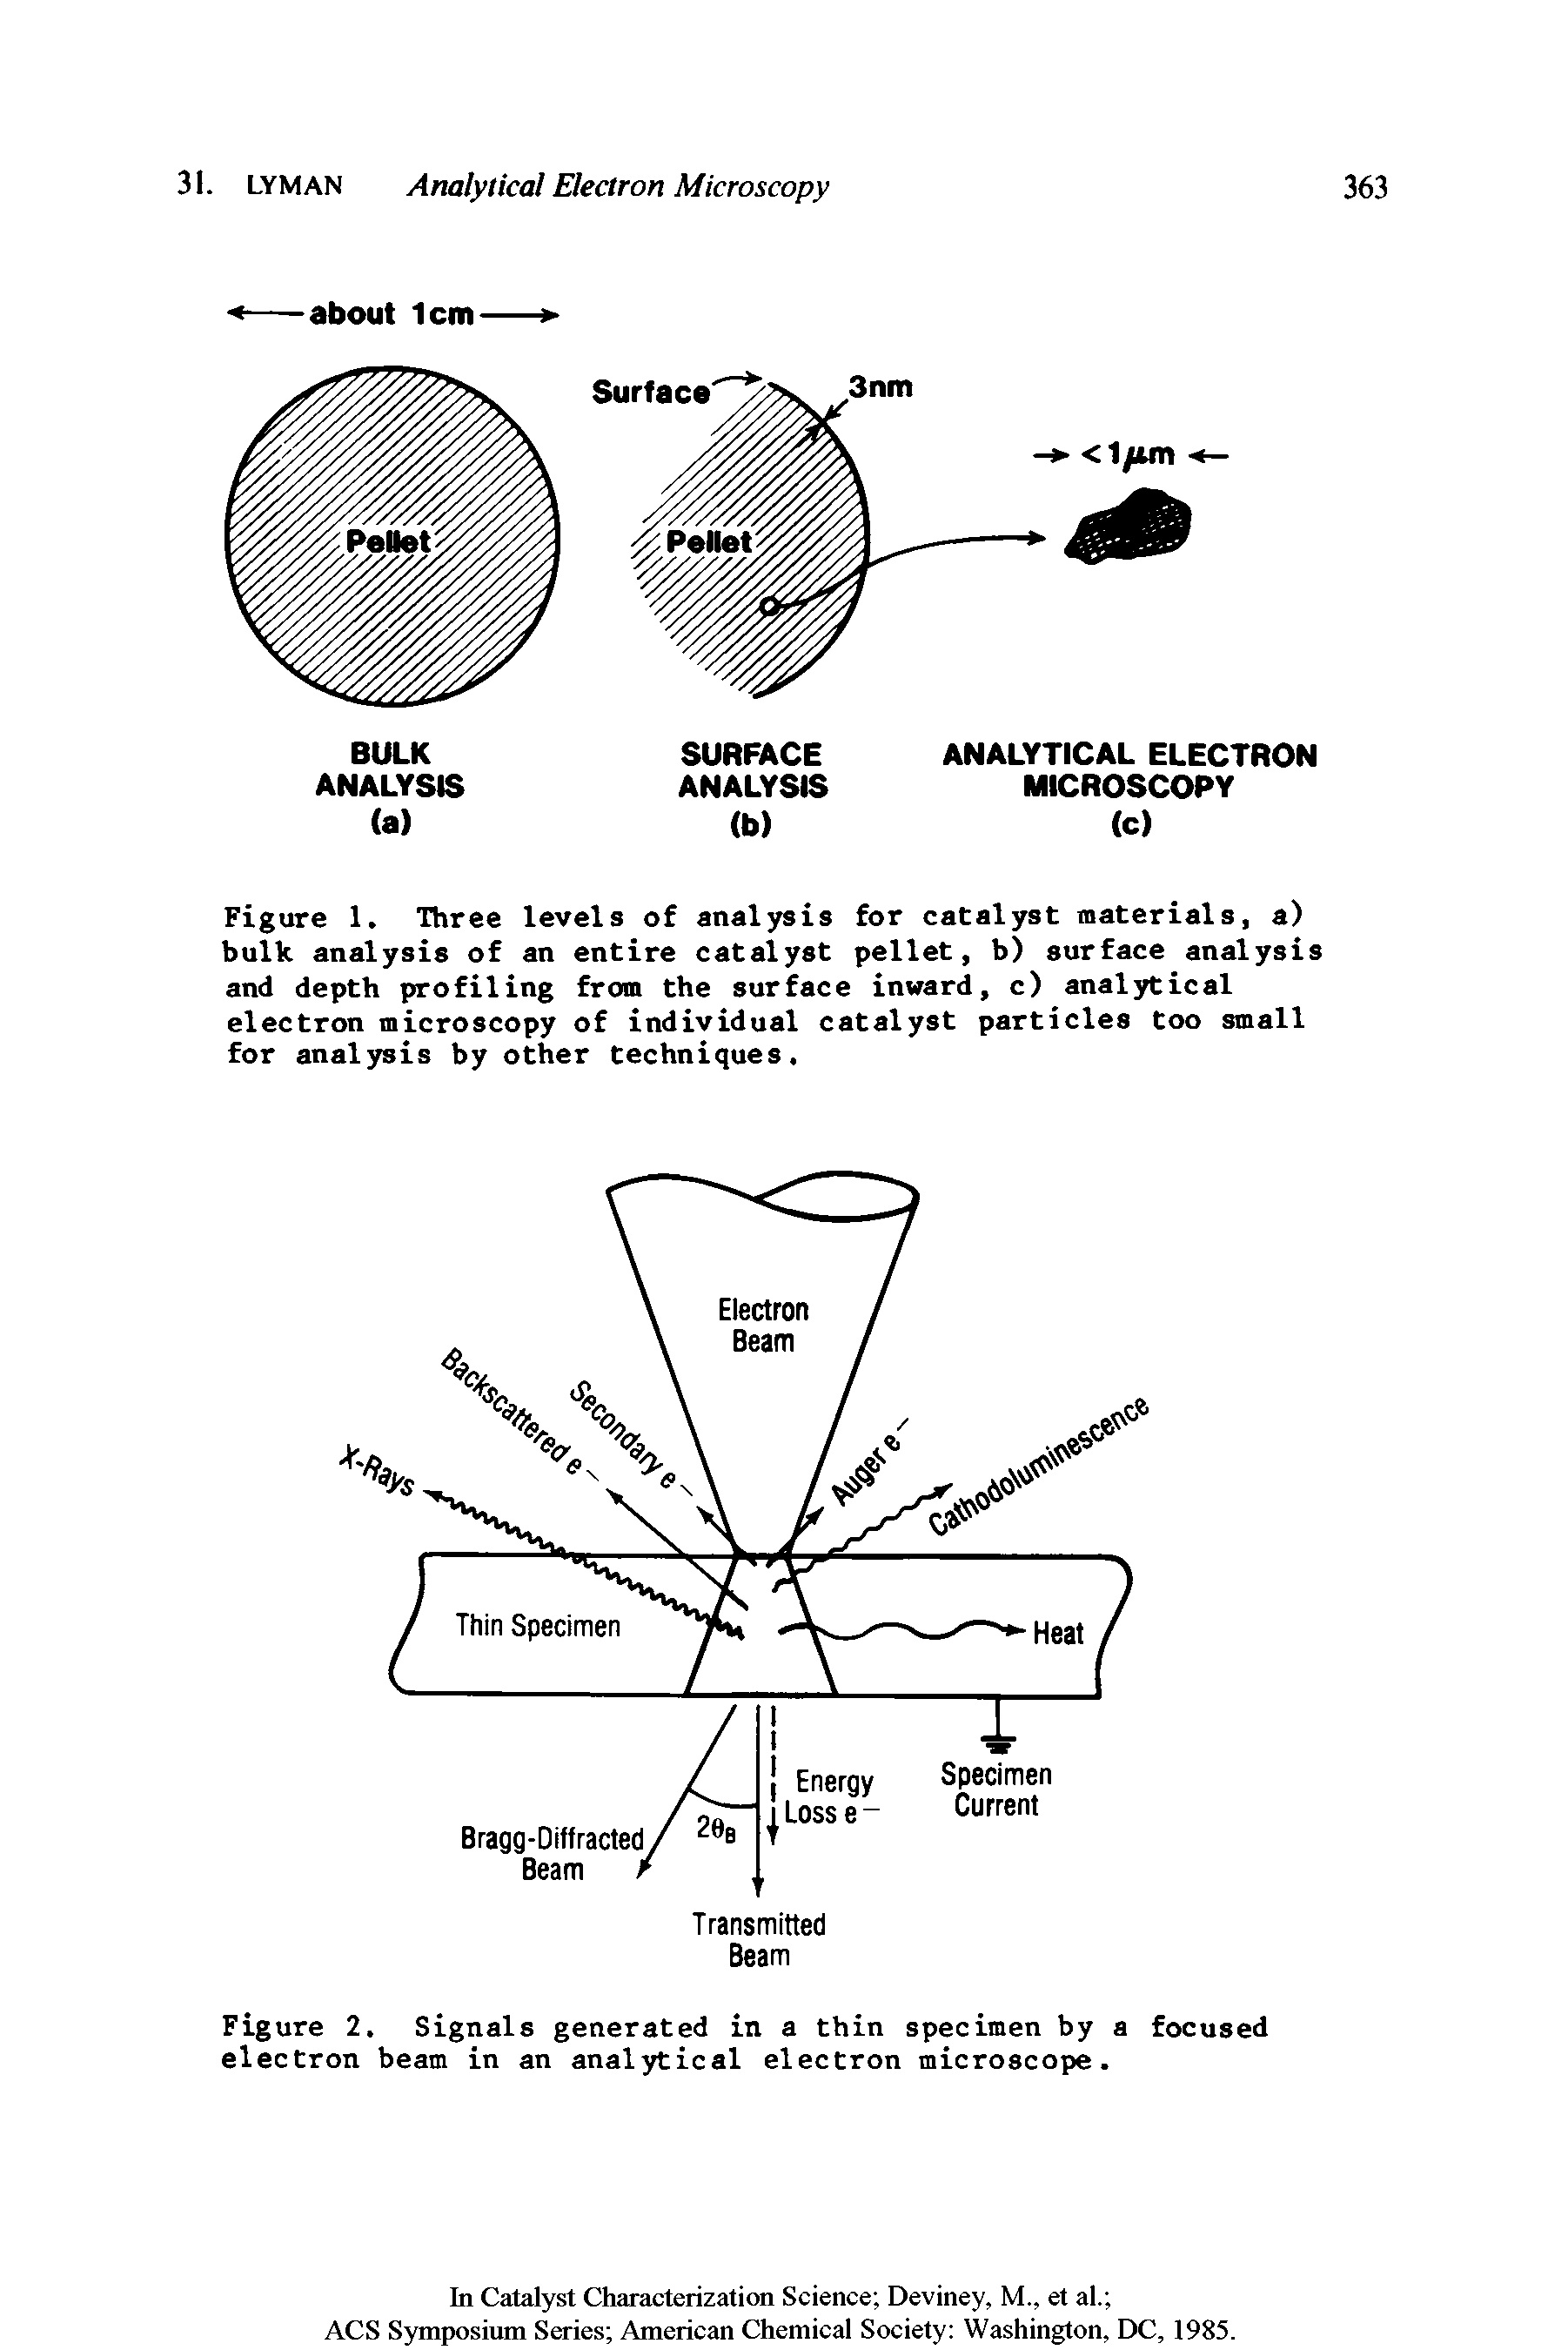 Figure 1. Three levels of analysis for catalyst materials, a) bulk analysis of an entire catalyst pellet, b) surface analysis and depth profiling from the surface inward, c) analytical electron microscopy of individual catalyst particles too small for analysis by other techniques.